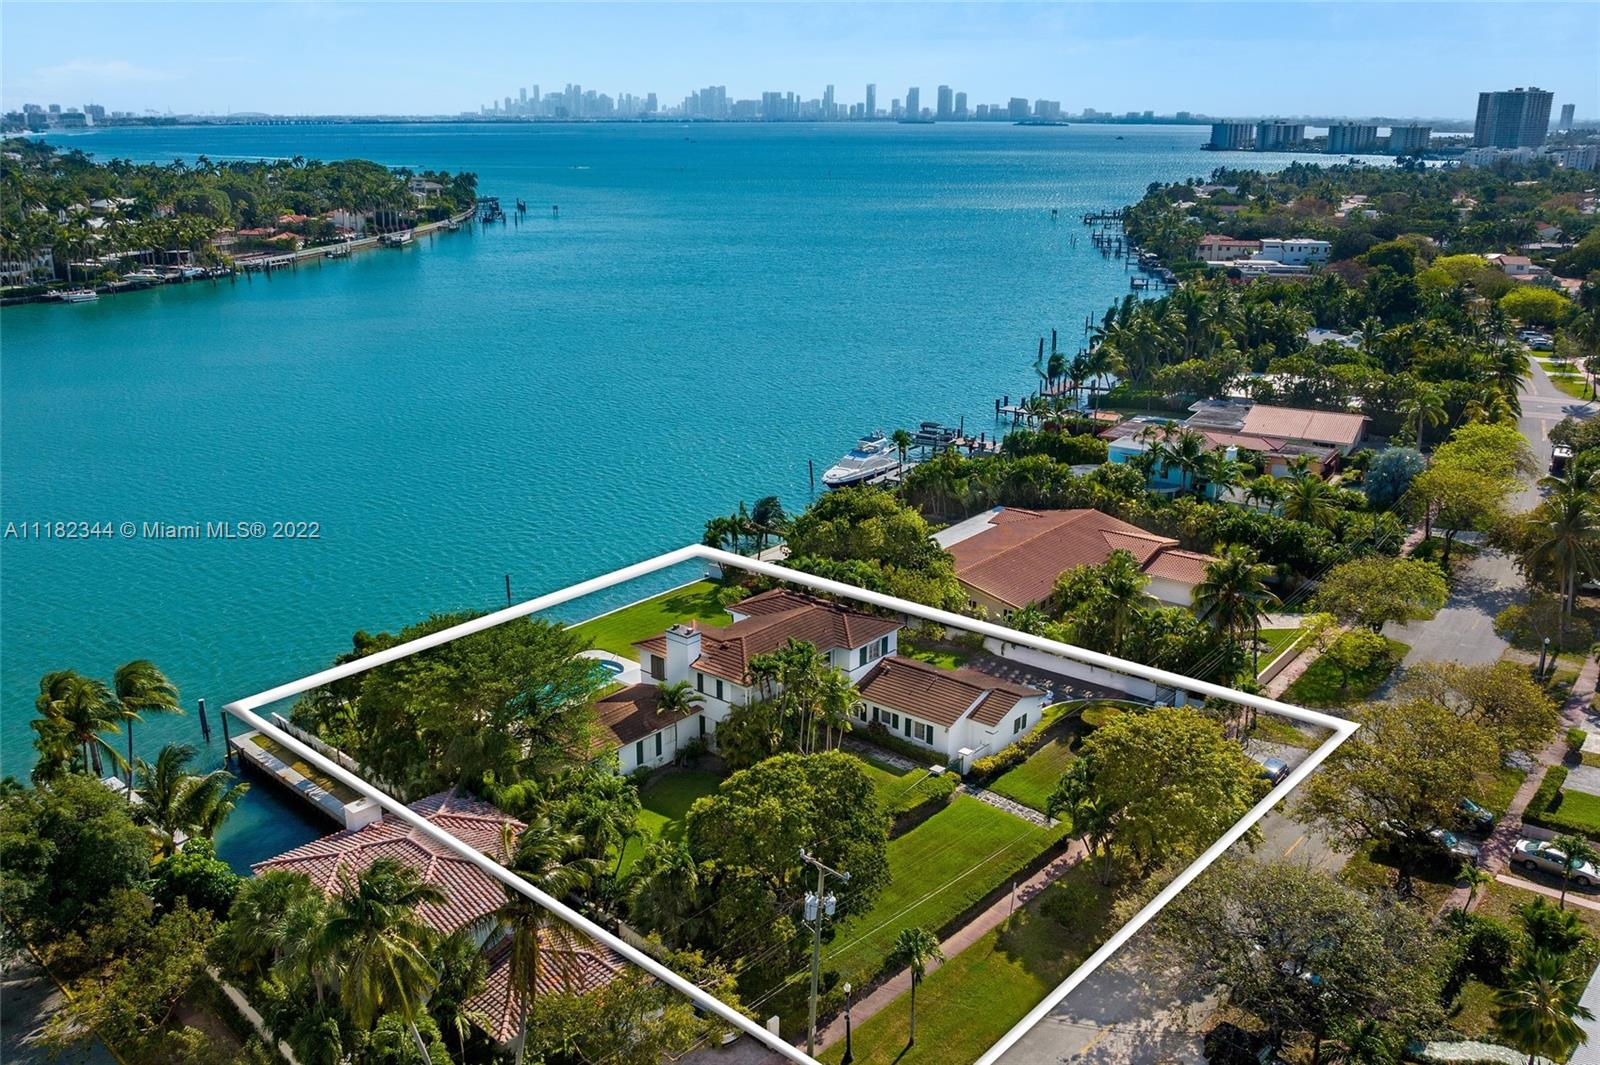 Largest lot on all of Bay Dr. Live on a rare 26,775 square foot double lot located in Normandy Isles. This 5 bedroom, 4,169 square foot home sits on an expansive lot featuring 157’ of linear water frontage showcasing breathtaking wide open Biscayne Bay and Downtown Miami skyline views offering incredible sunrises and sunsets. A boater’s paradise with the most coveted East and South facing views and no bridges to bay, a lifestyle on the water awaits you. Live in close proximity to Bal Harbour Shops and world class shopping, dining and beaches.